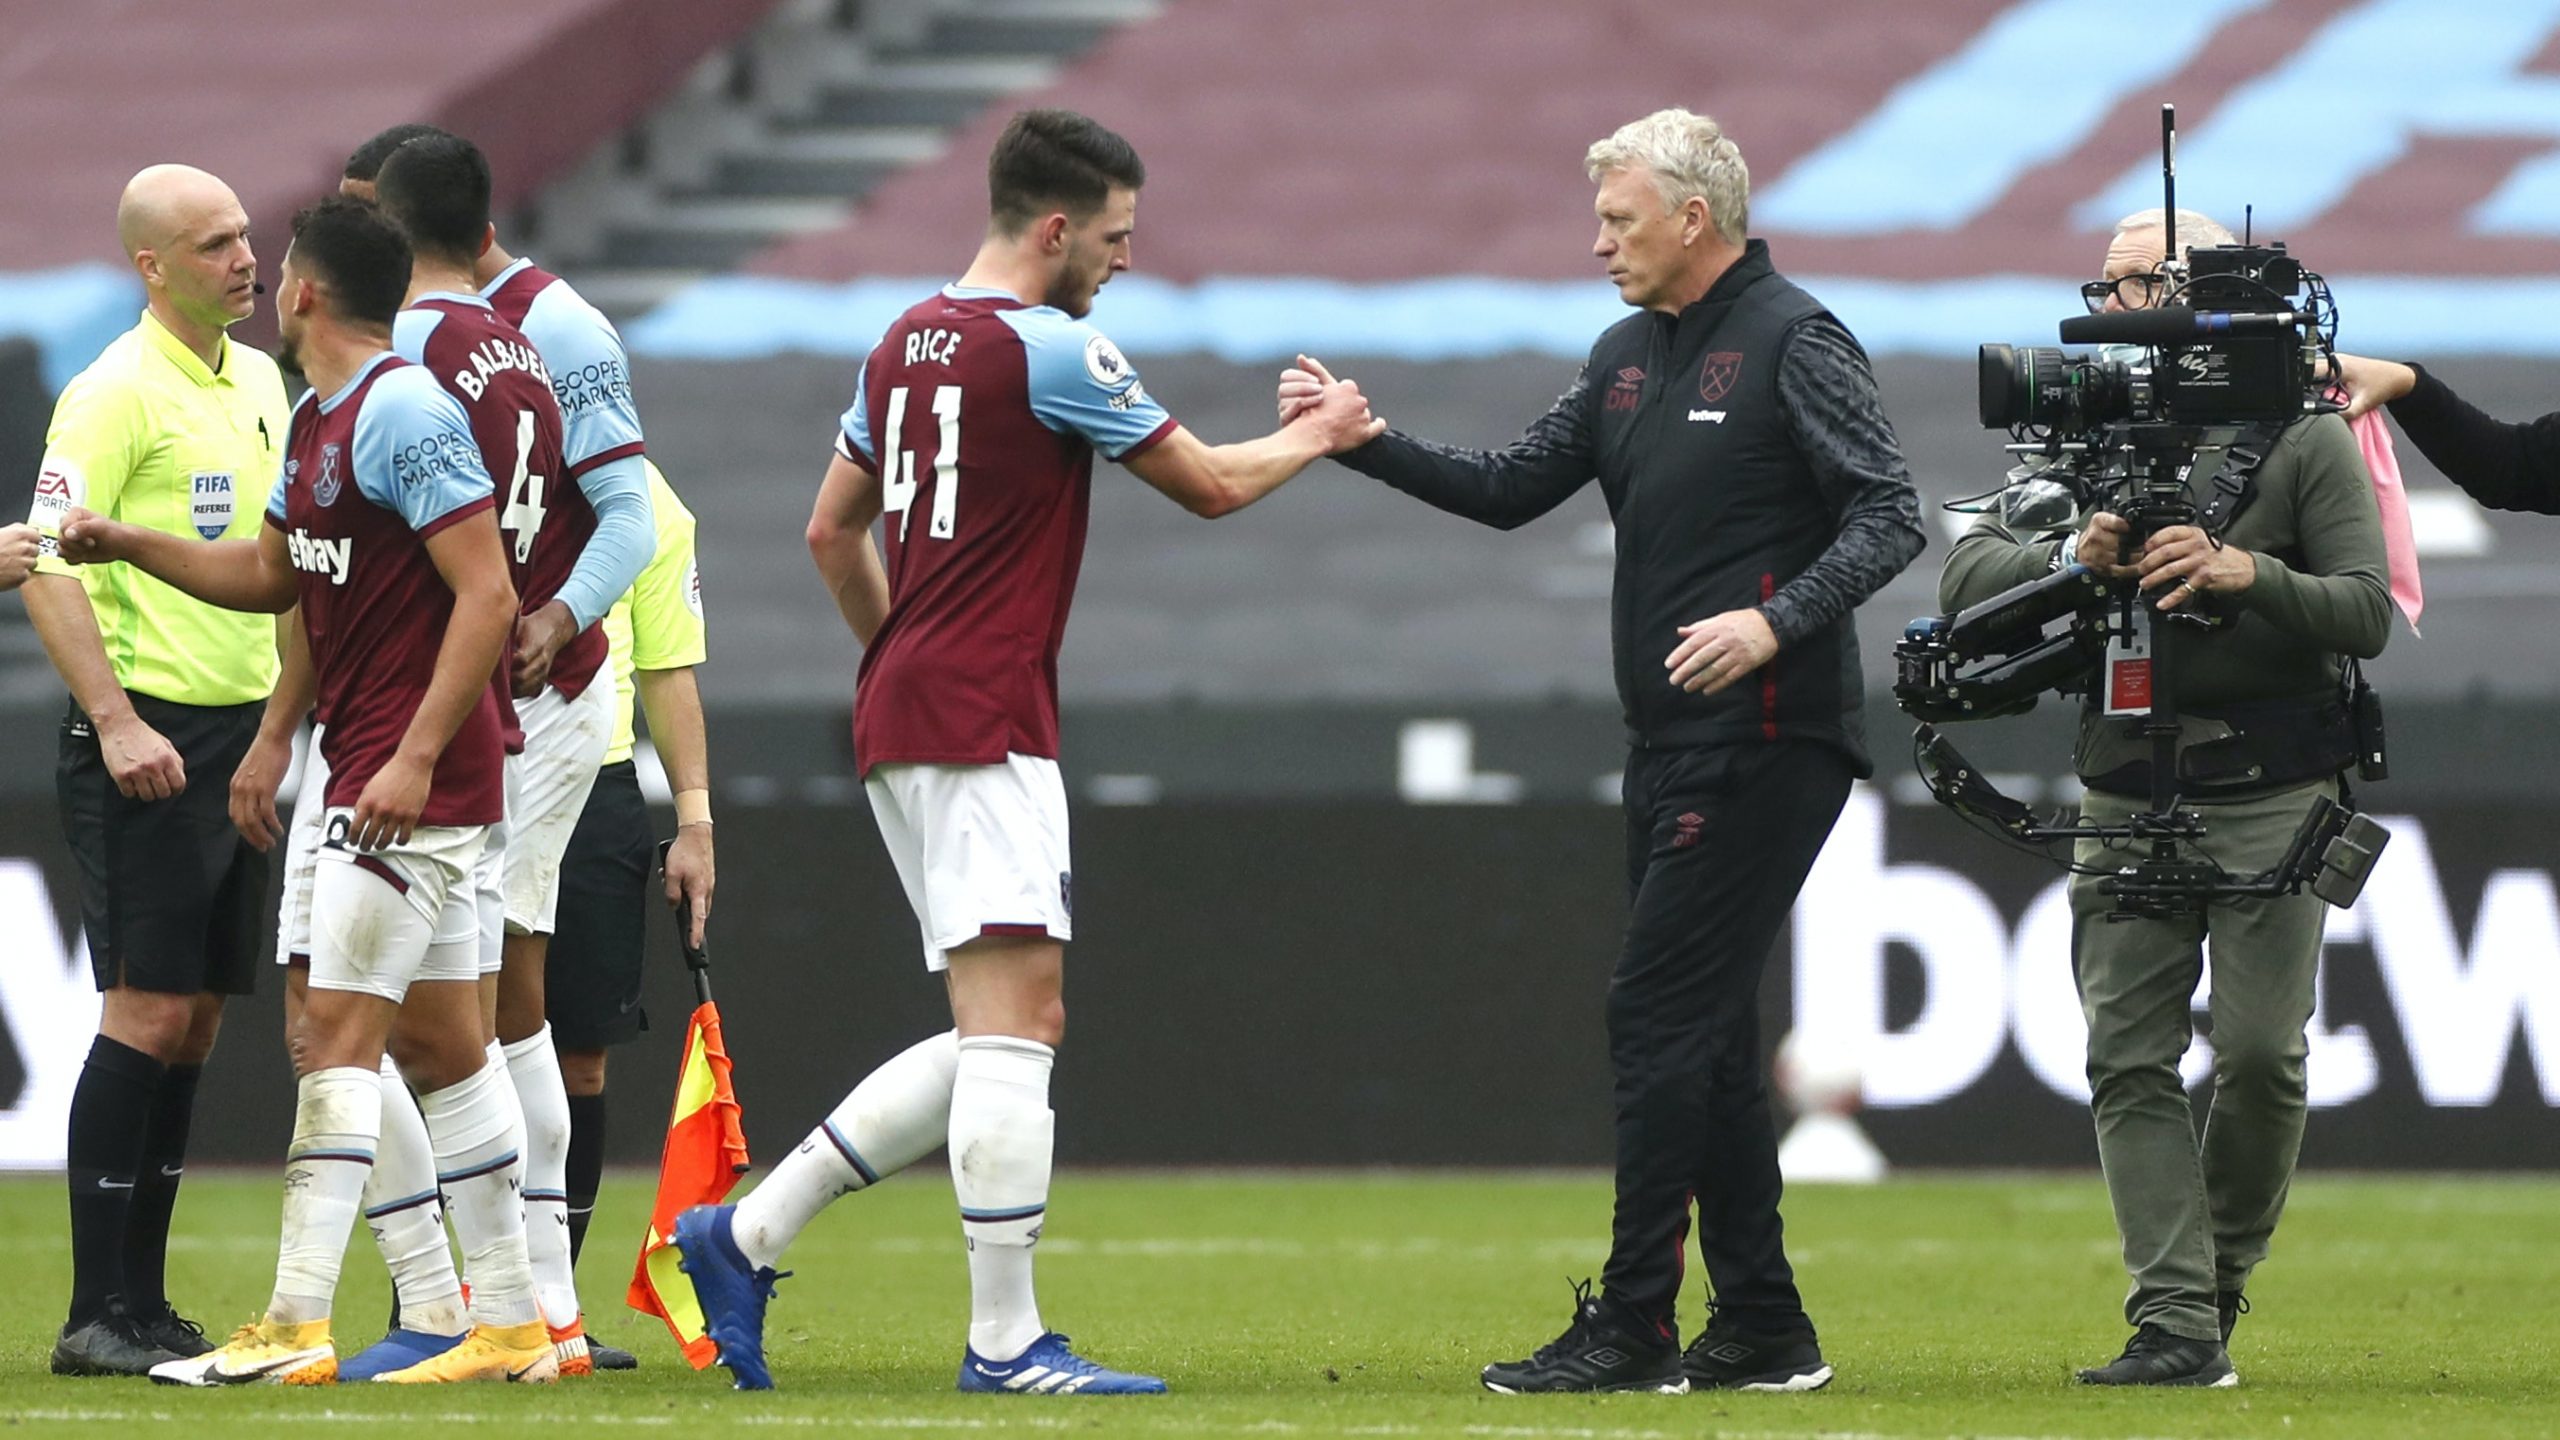 David Moyes impressed at West Ham's transition after a poor start to the season

